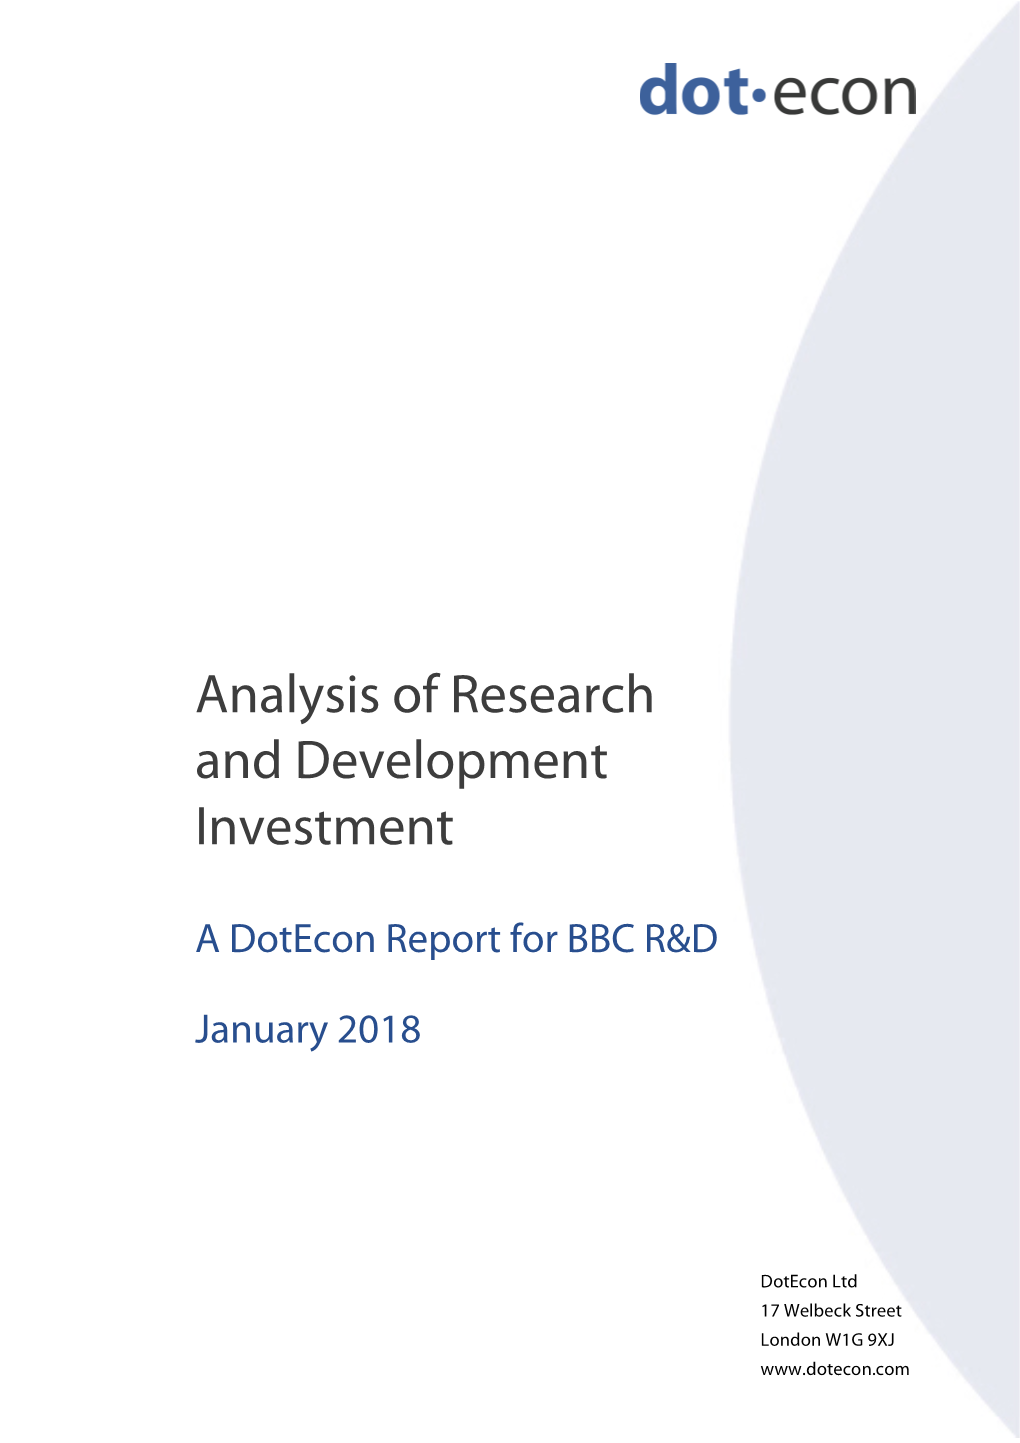 Cost Benefit Analysis of Innovate UK’S ‘Smart’ R&D Financing Programme7 Determines the Cost Benefit Ratio to Be from 1:4 to 1:5